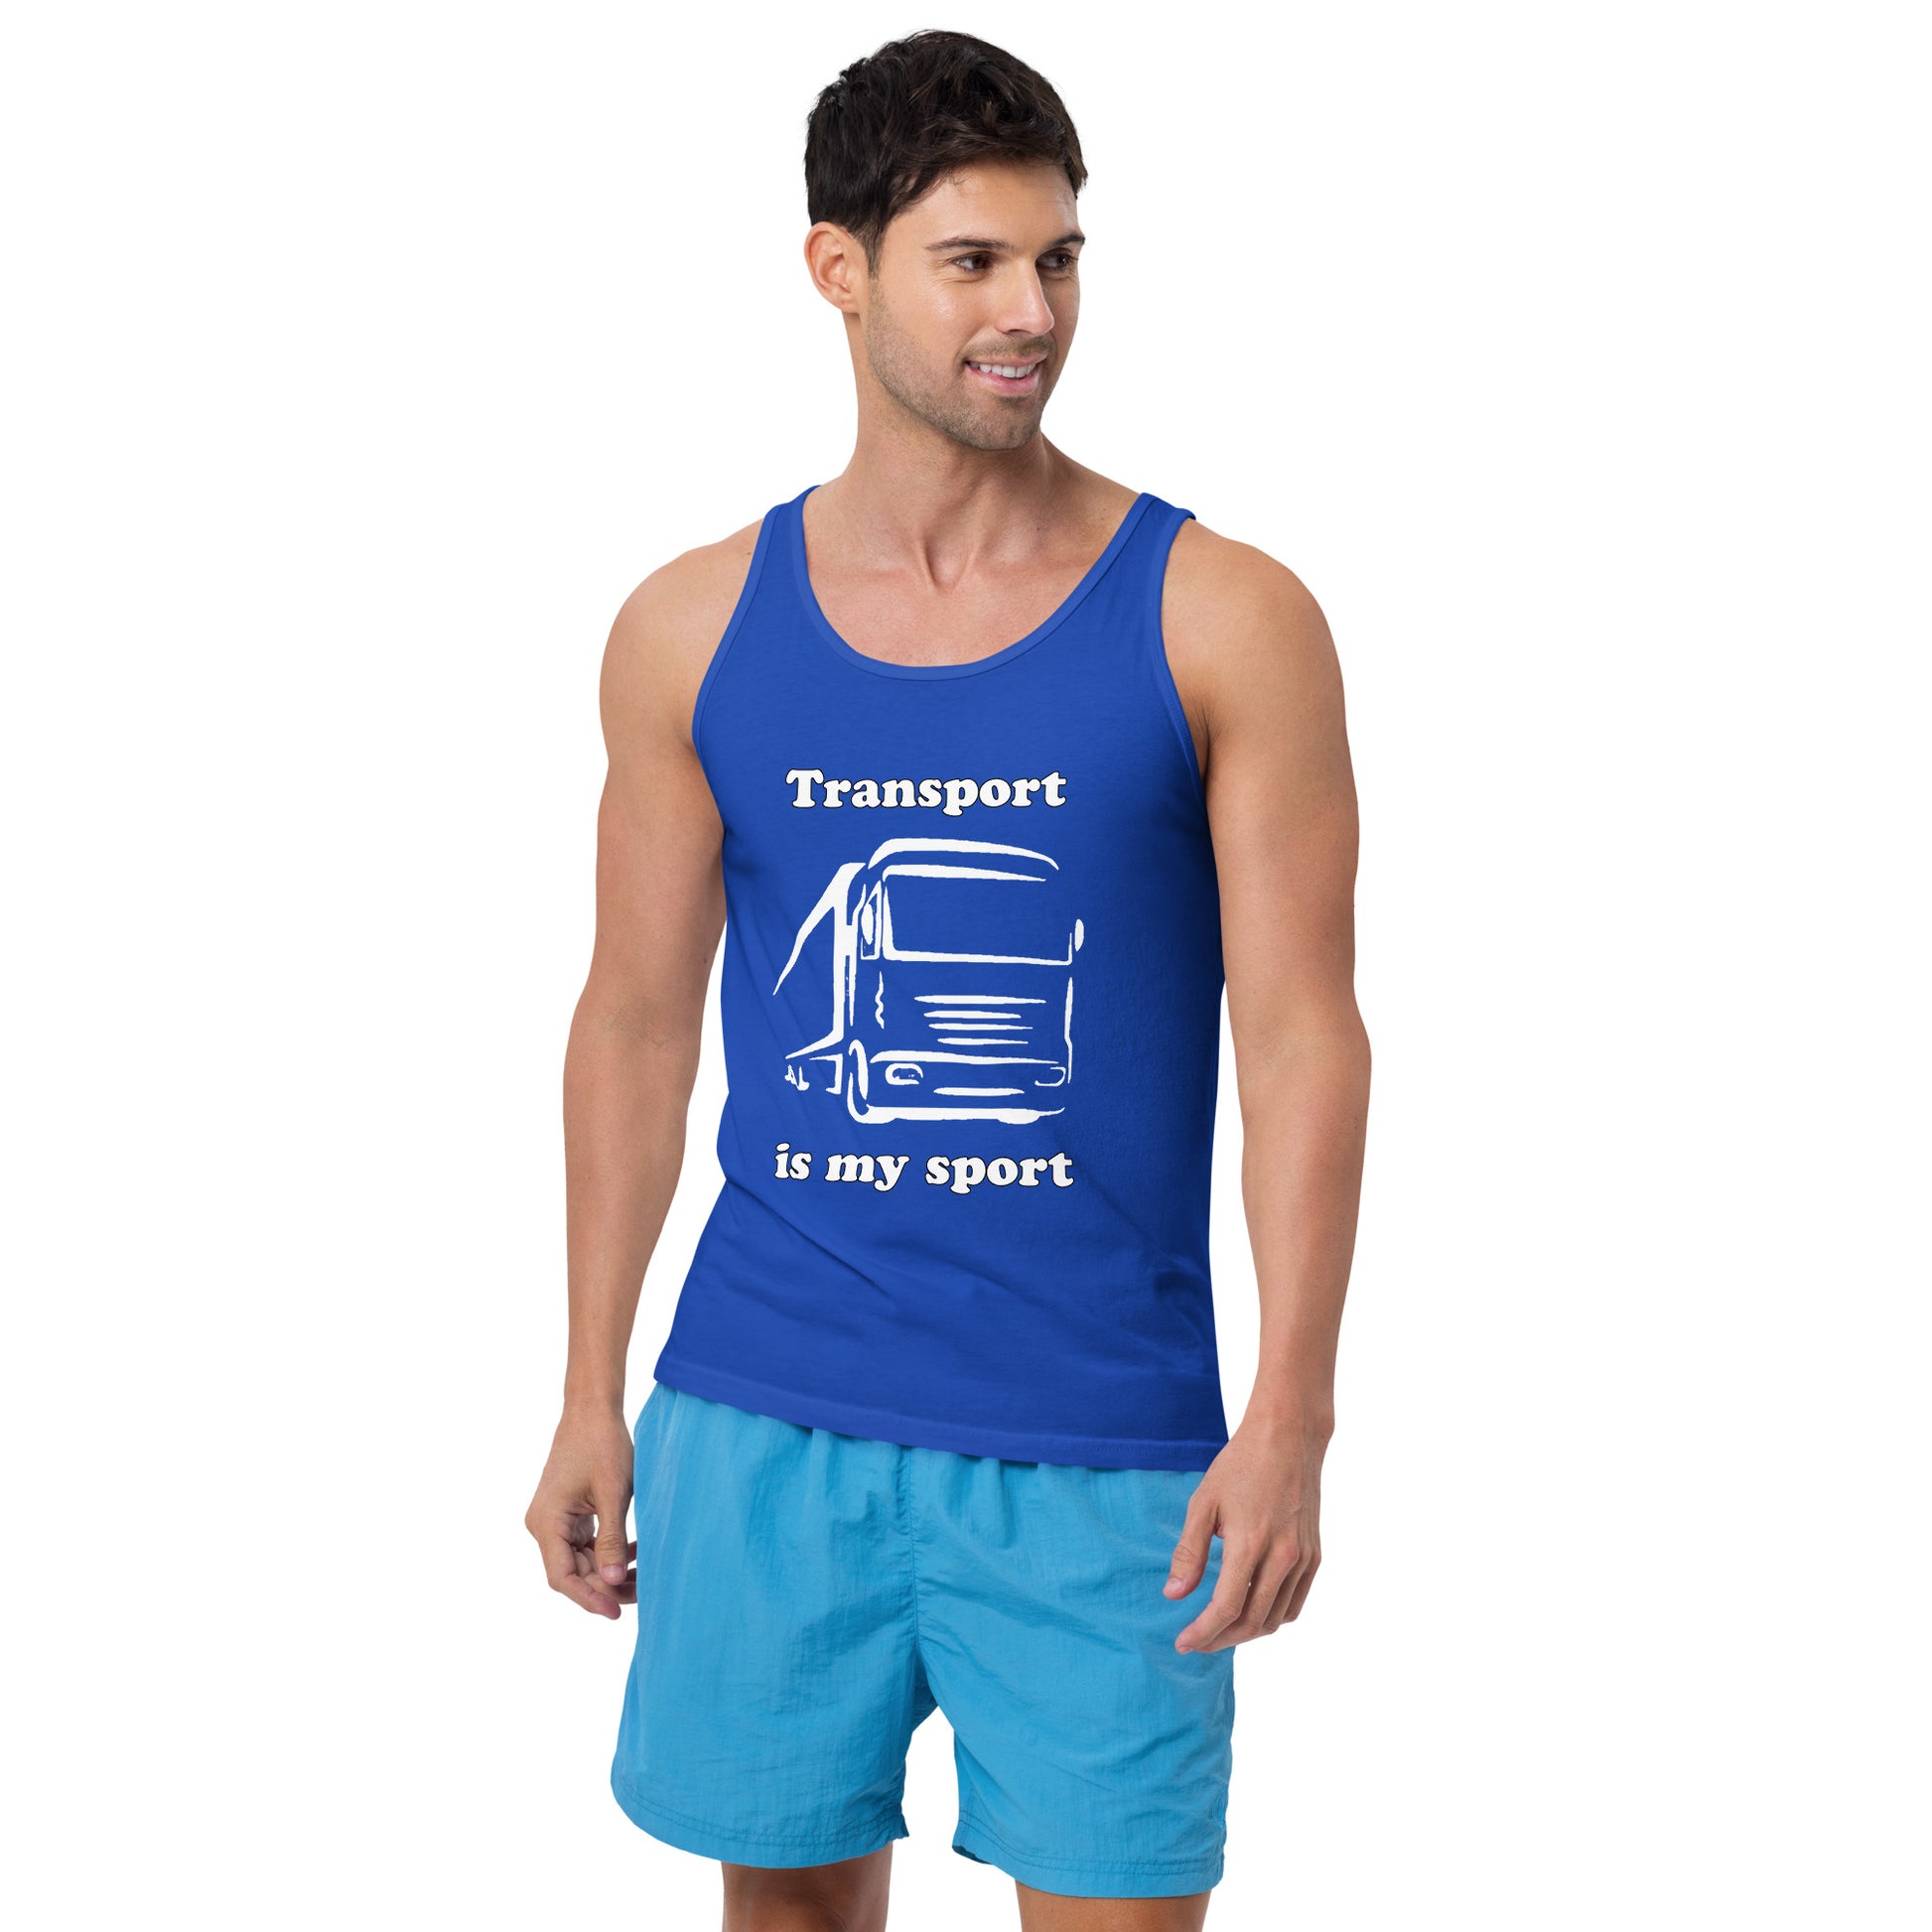 Man with royal blue tank top with picture of truck and text "Transport is my sport"